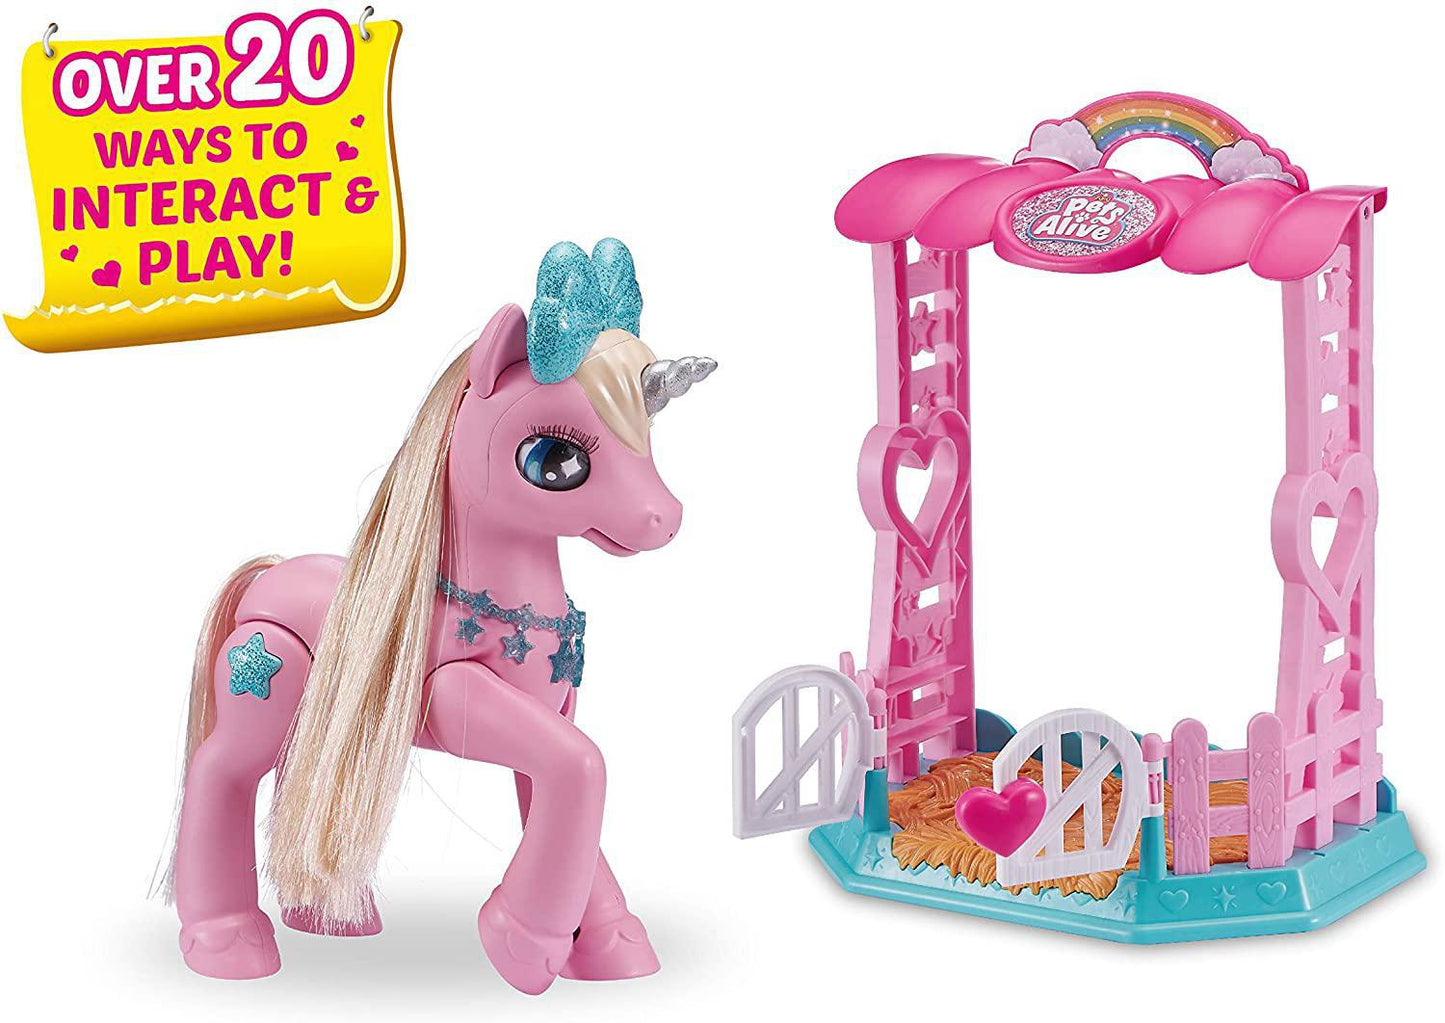 Pets Alive My Magical Unicorn with Magical Horn Lights up - Interactive Robotic Toy Playset Pink Unicorn